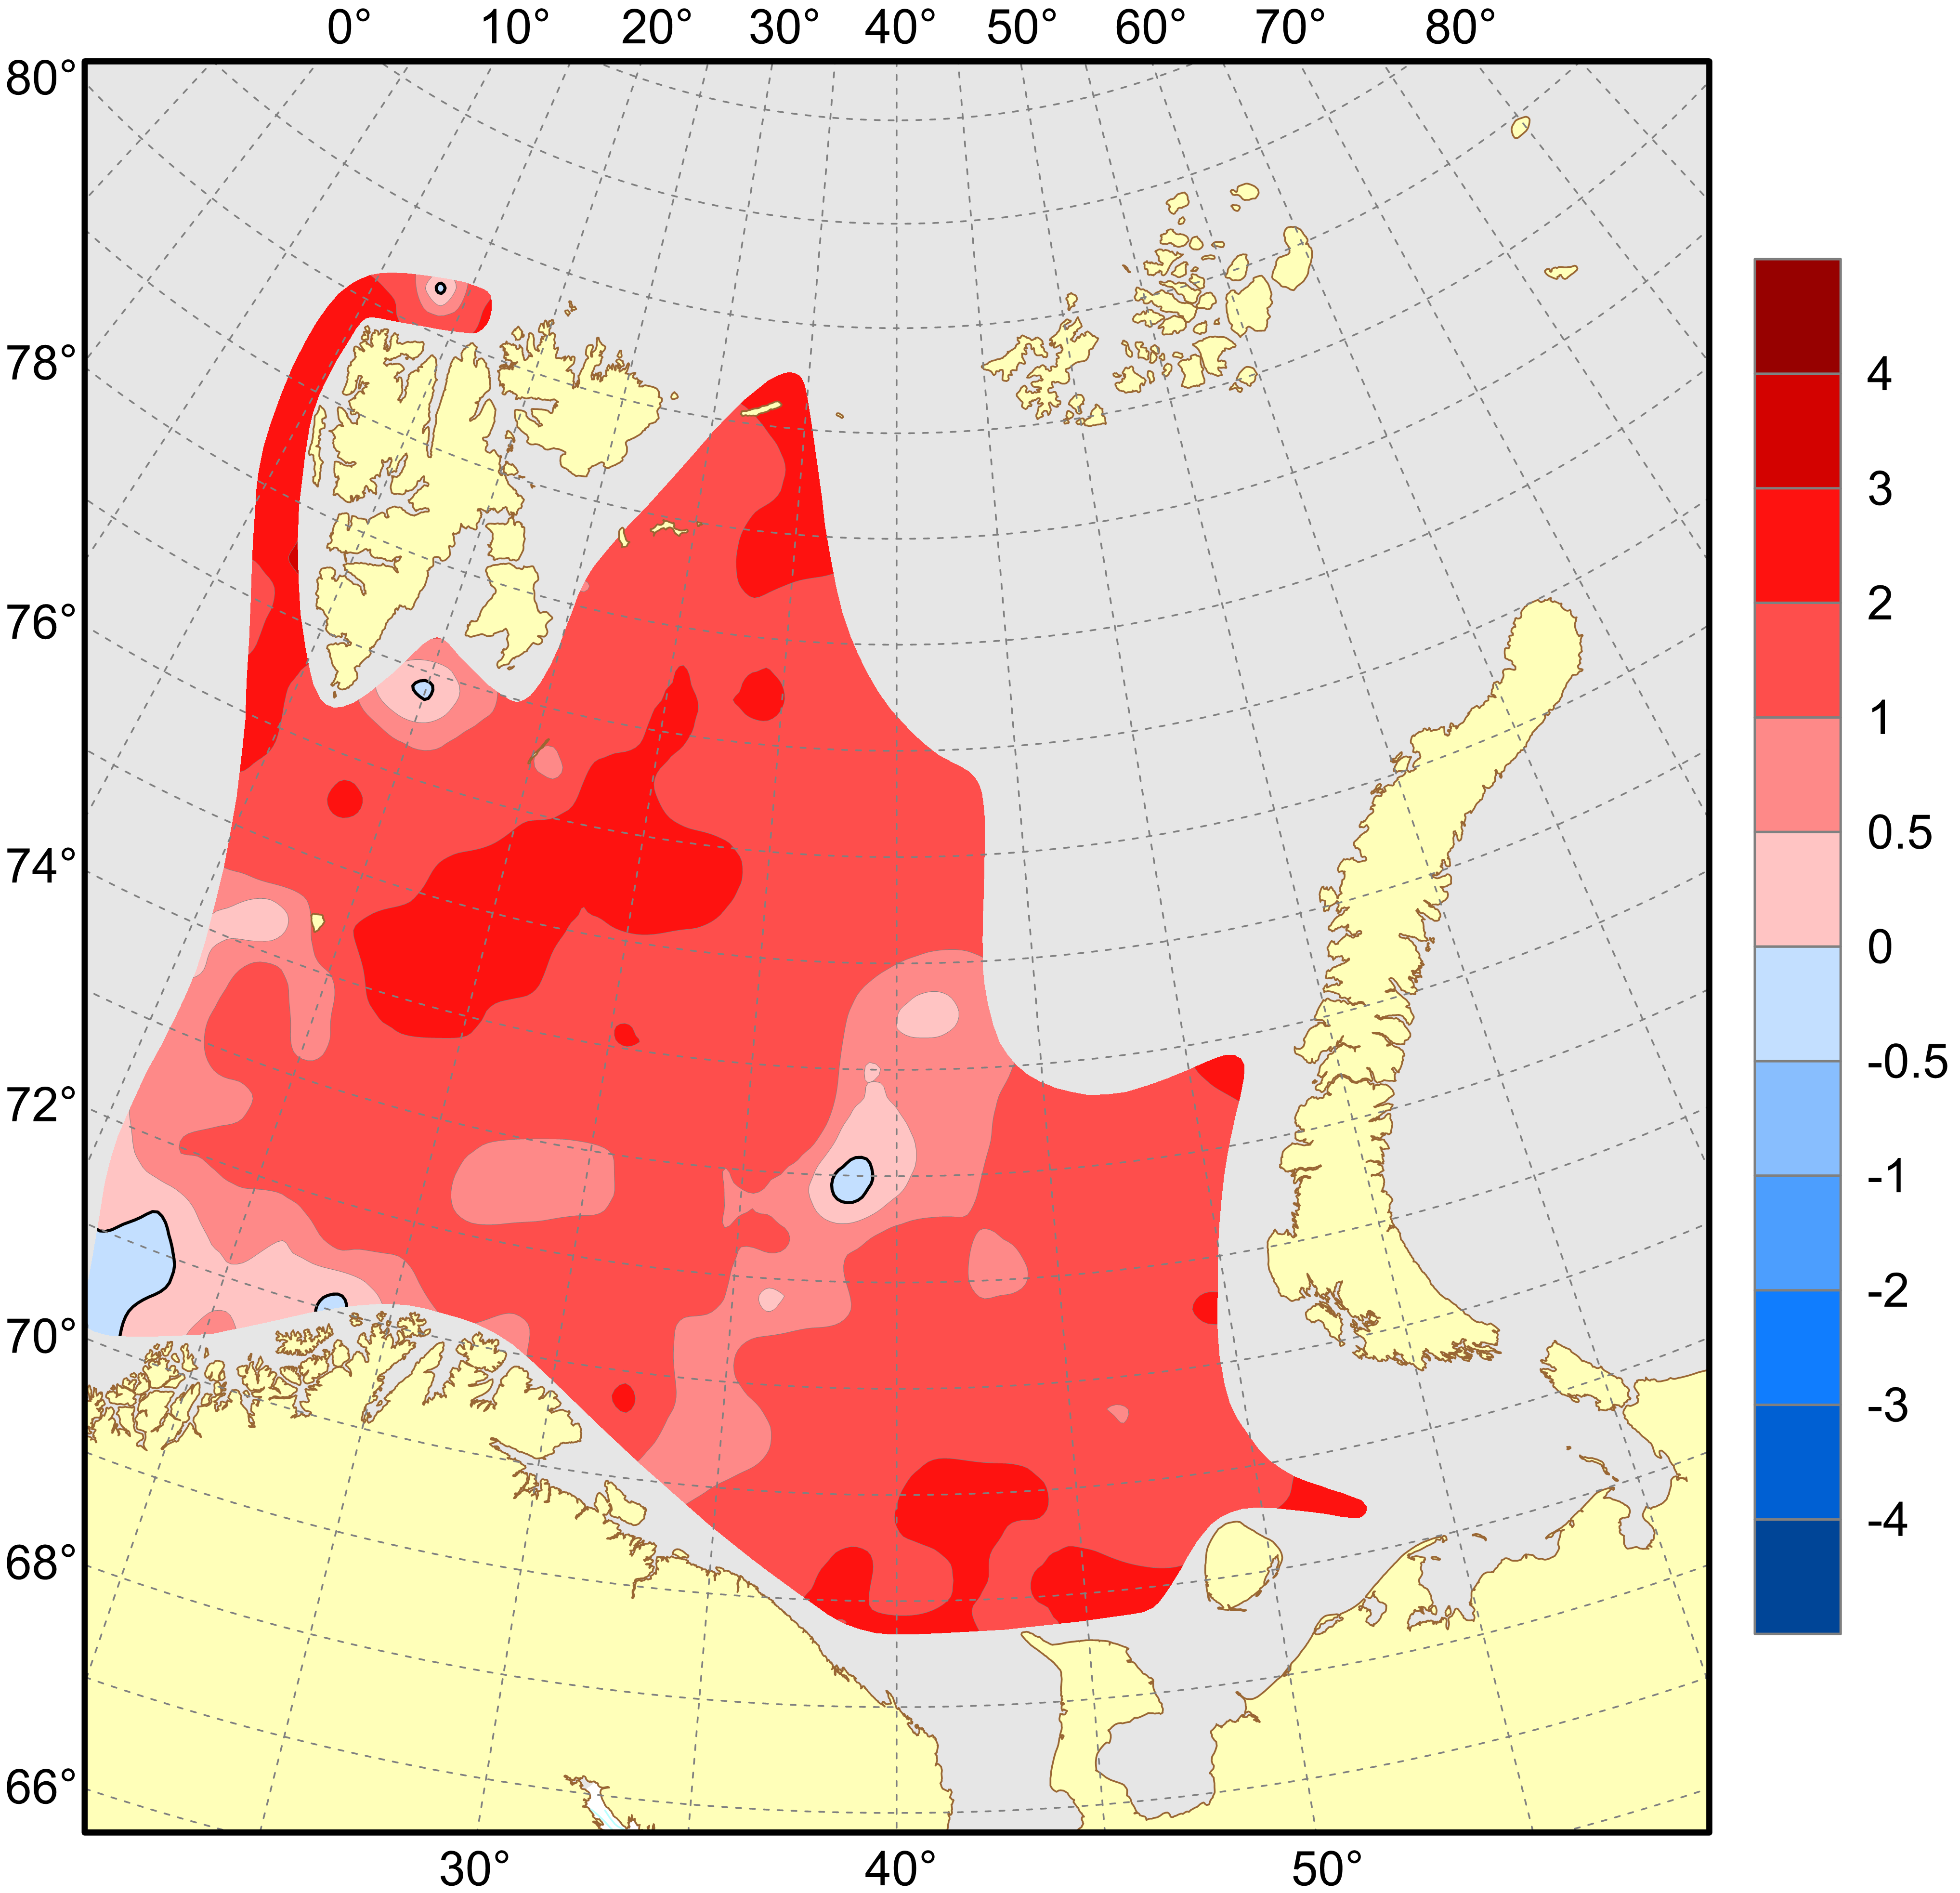 Fig 4.1.1.9. Surface temperature anomaly 2022